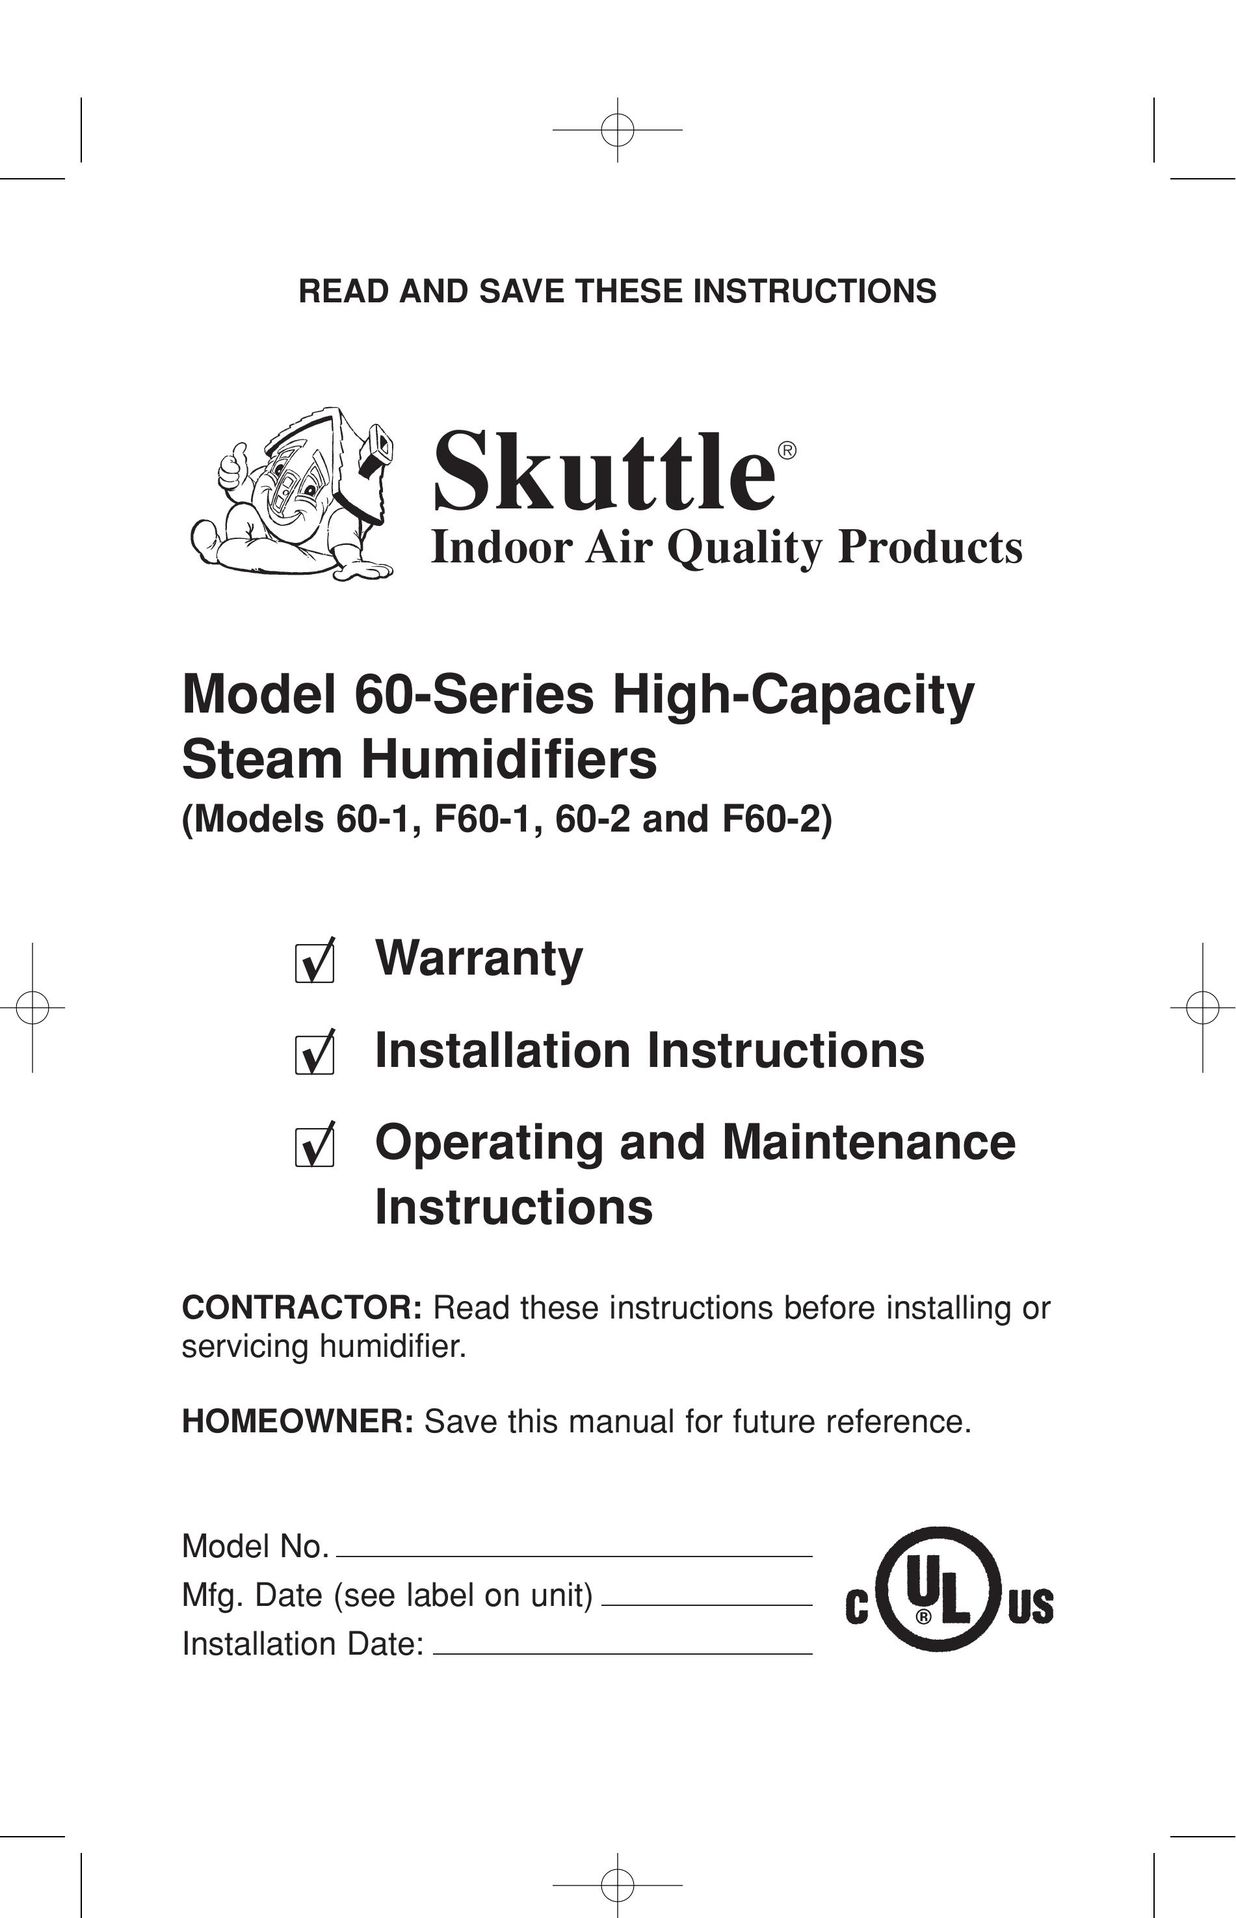 Skuttle Indoor Air Quality Products F60-2 Humidifier User Manual